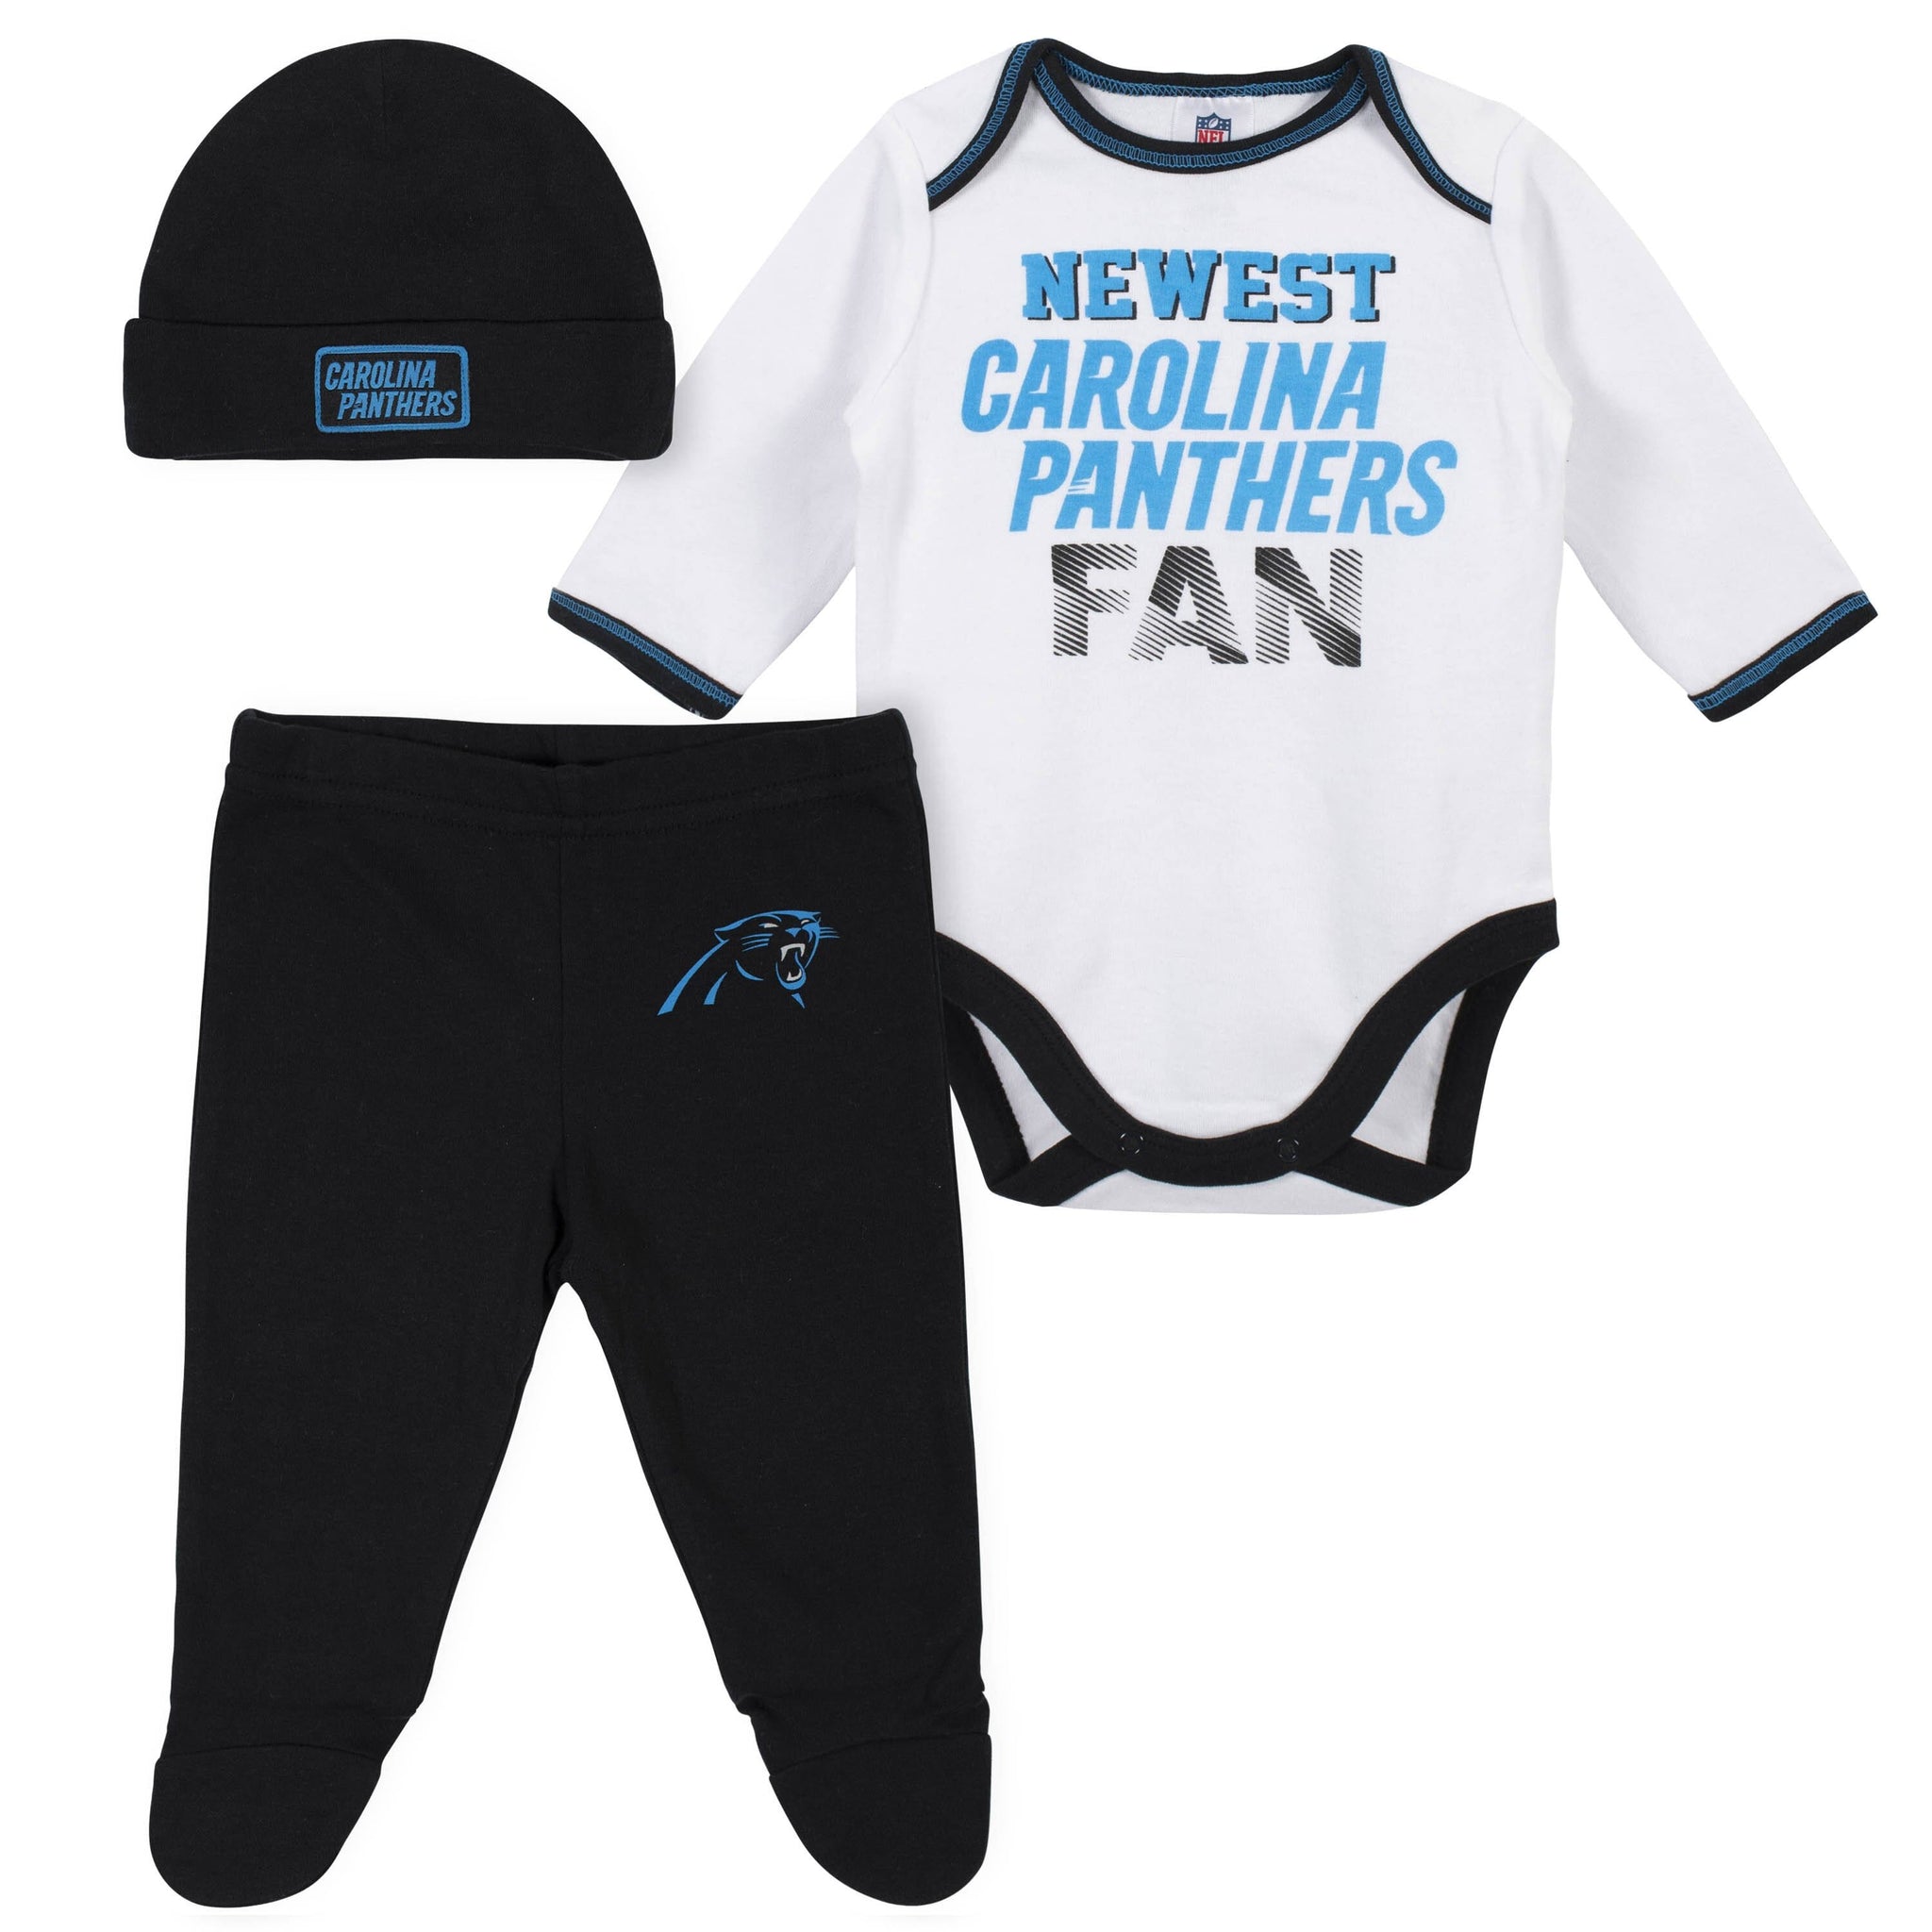 panthers baby jersey